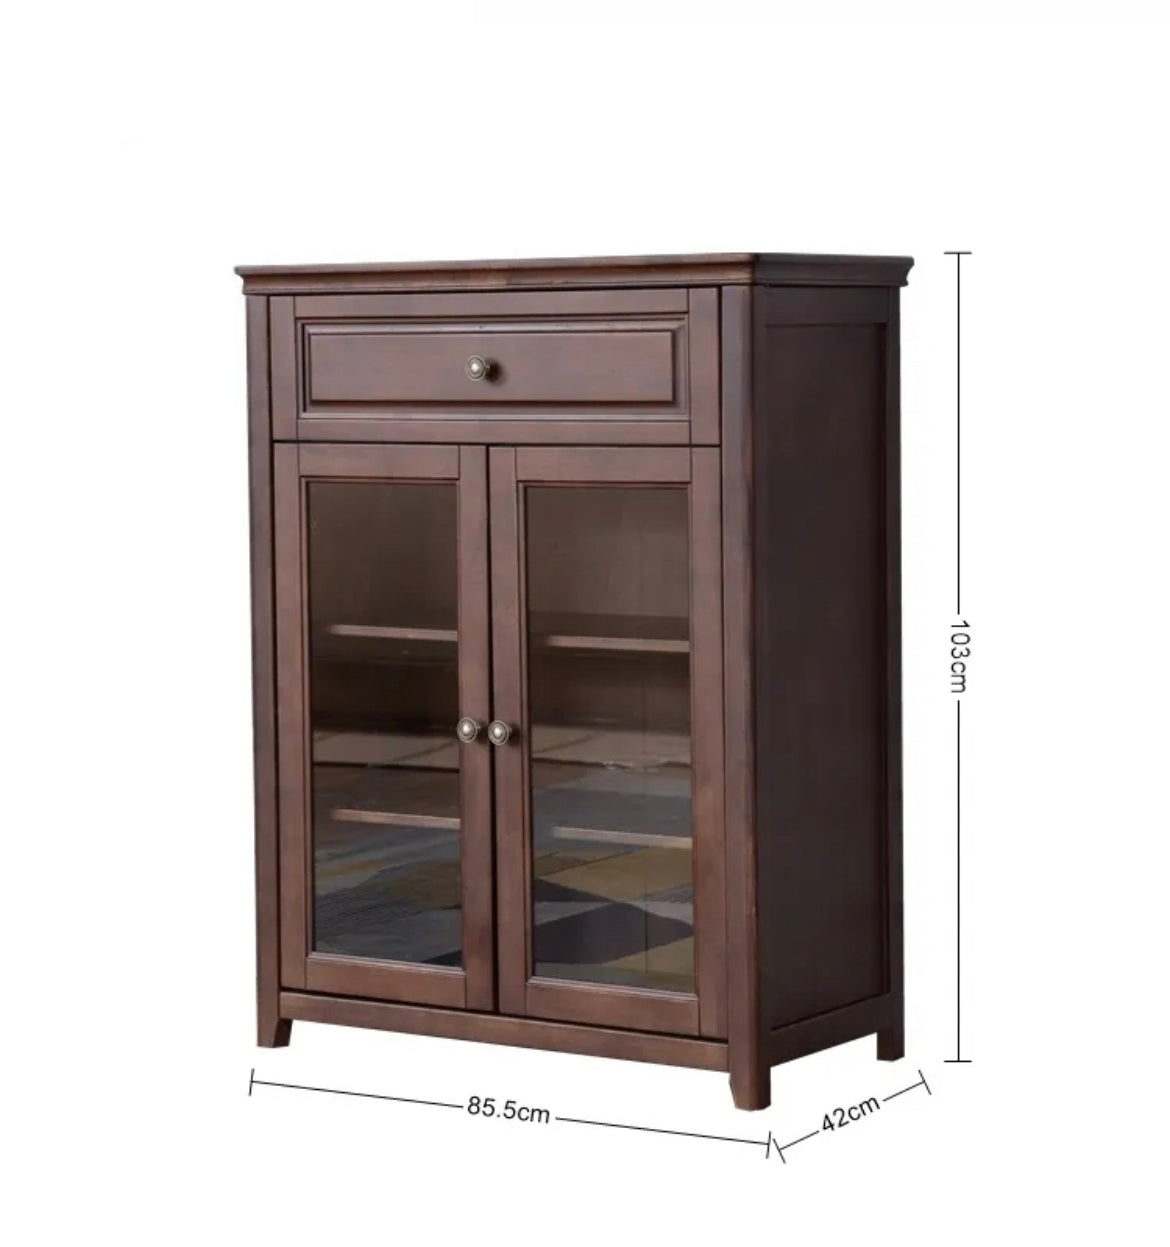 Cabinets American Rural Style Storable Living Room Furniture Solid Wood Cabinets